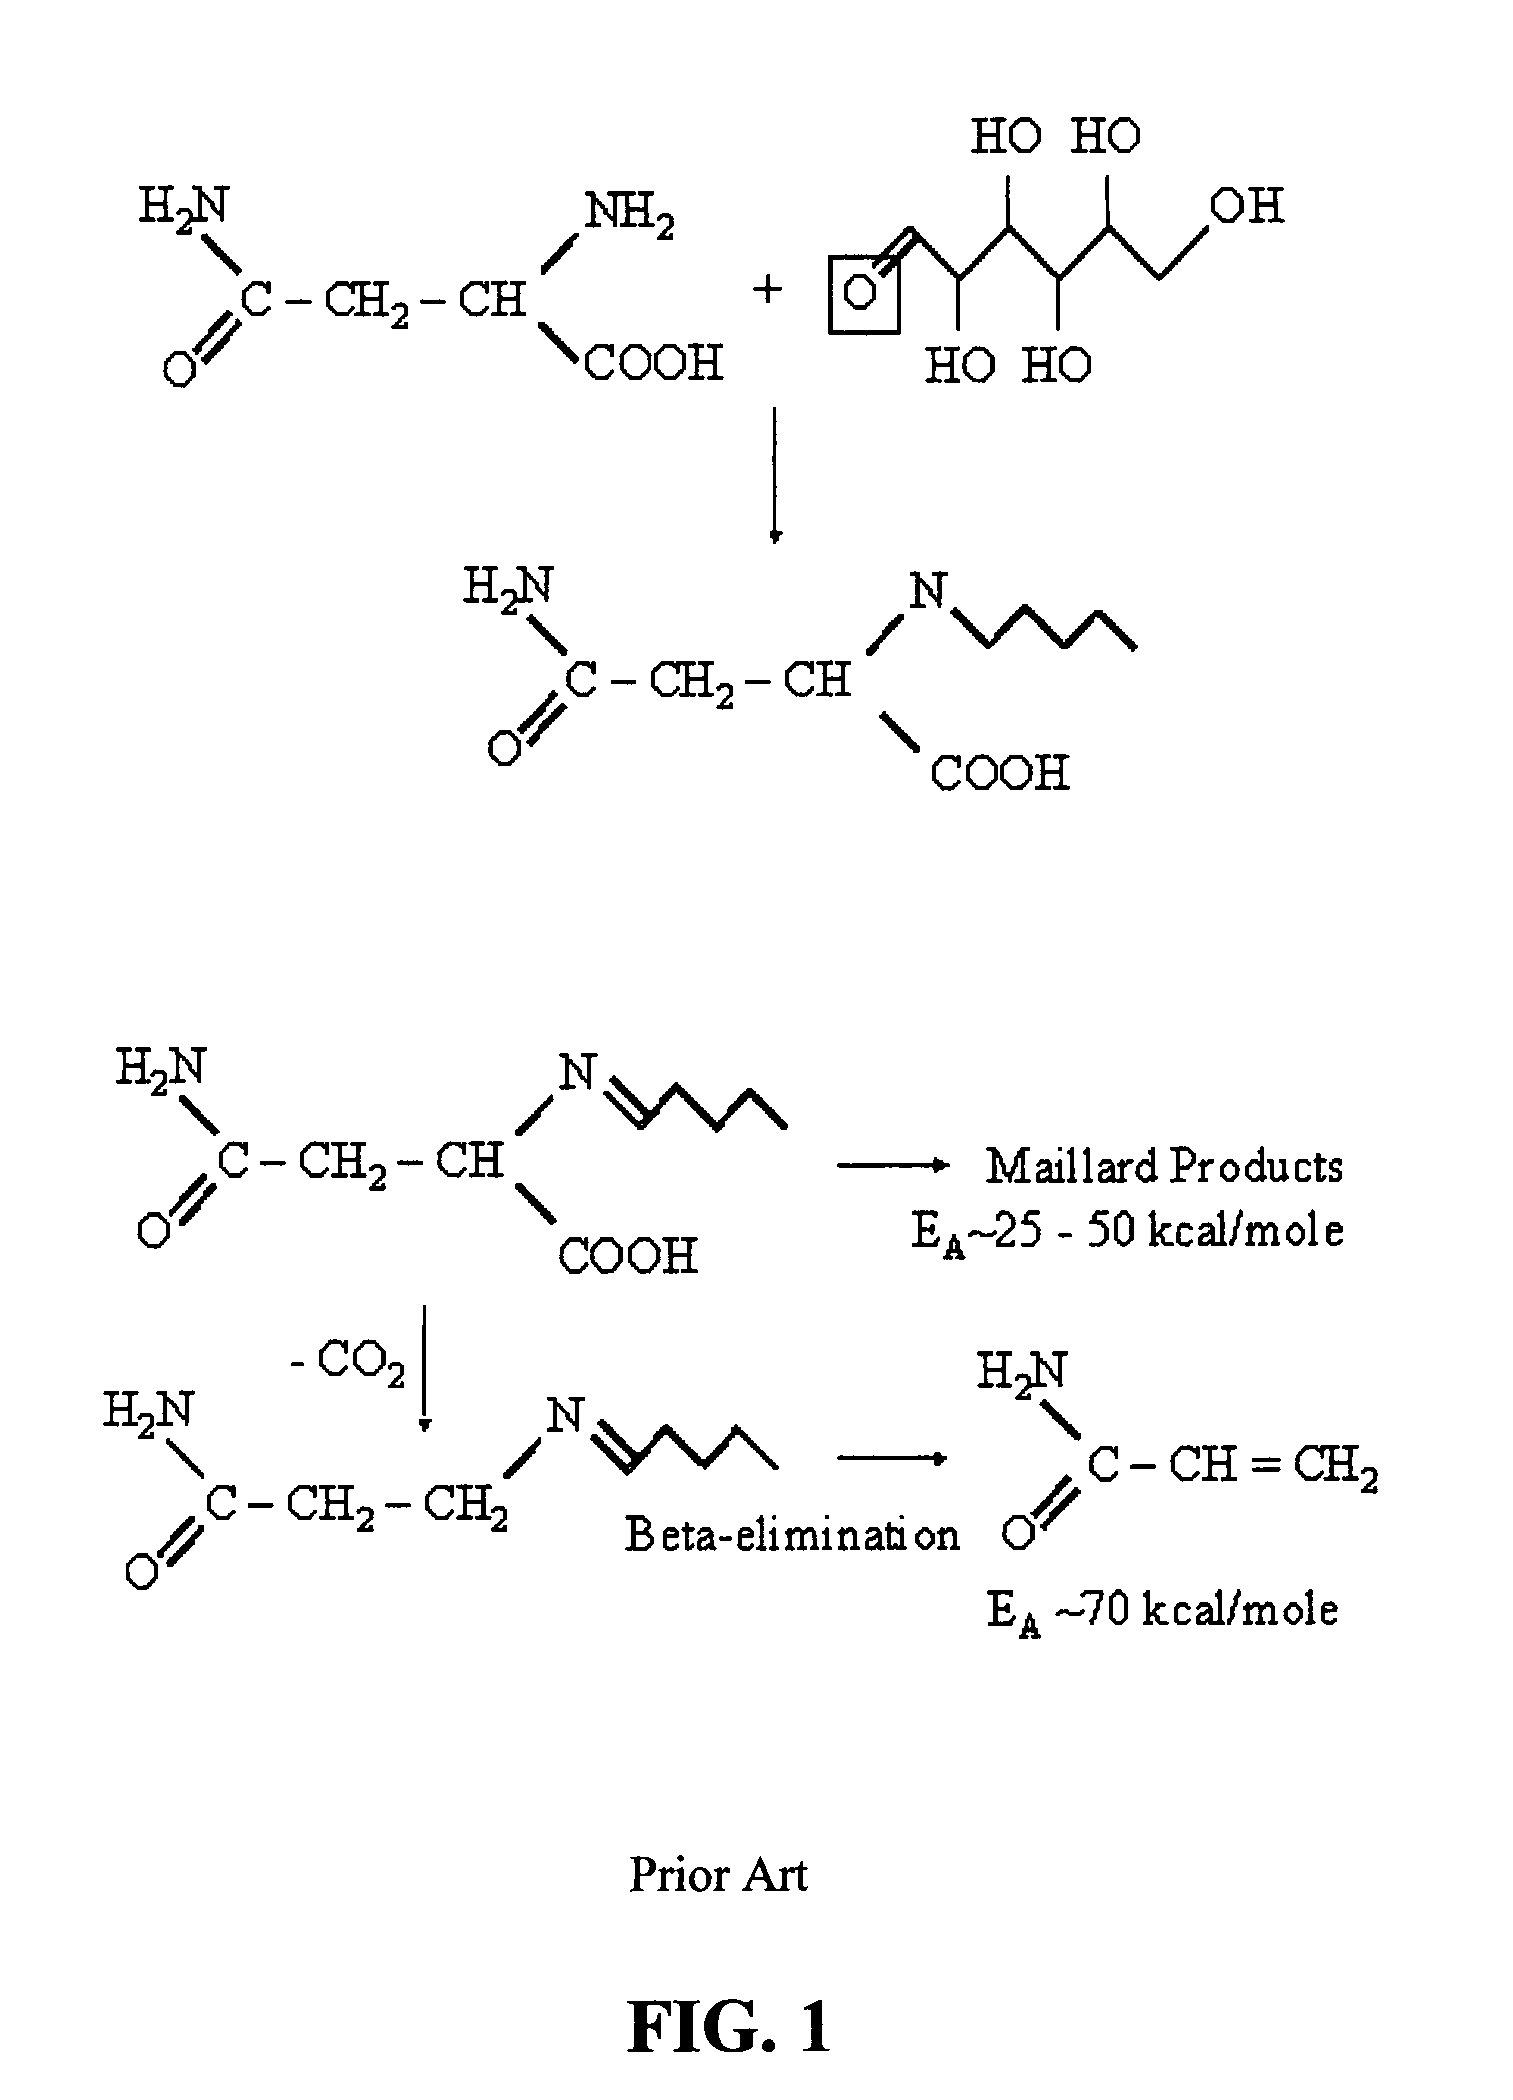 Devices and methods for the rapid, reliable detection and determination of acrylamide concentration in food substances and prevention of acrylamide formation in the same